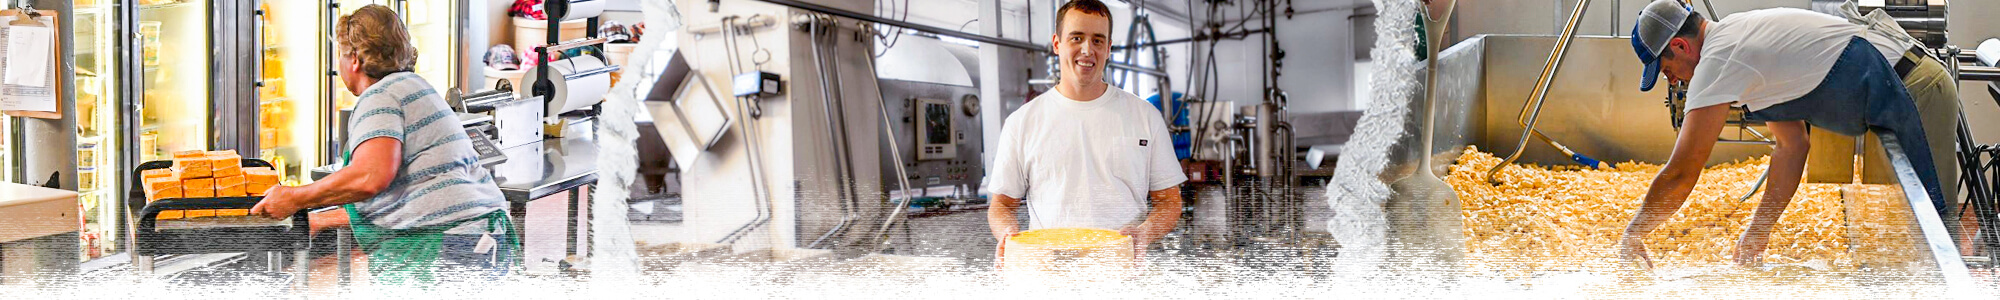 Master cheesemaker careers at Union Star